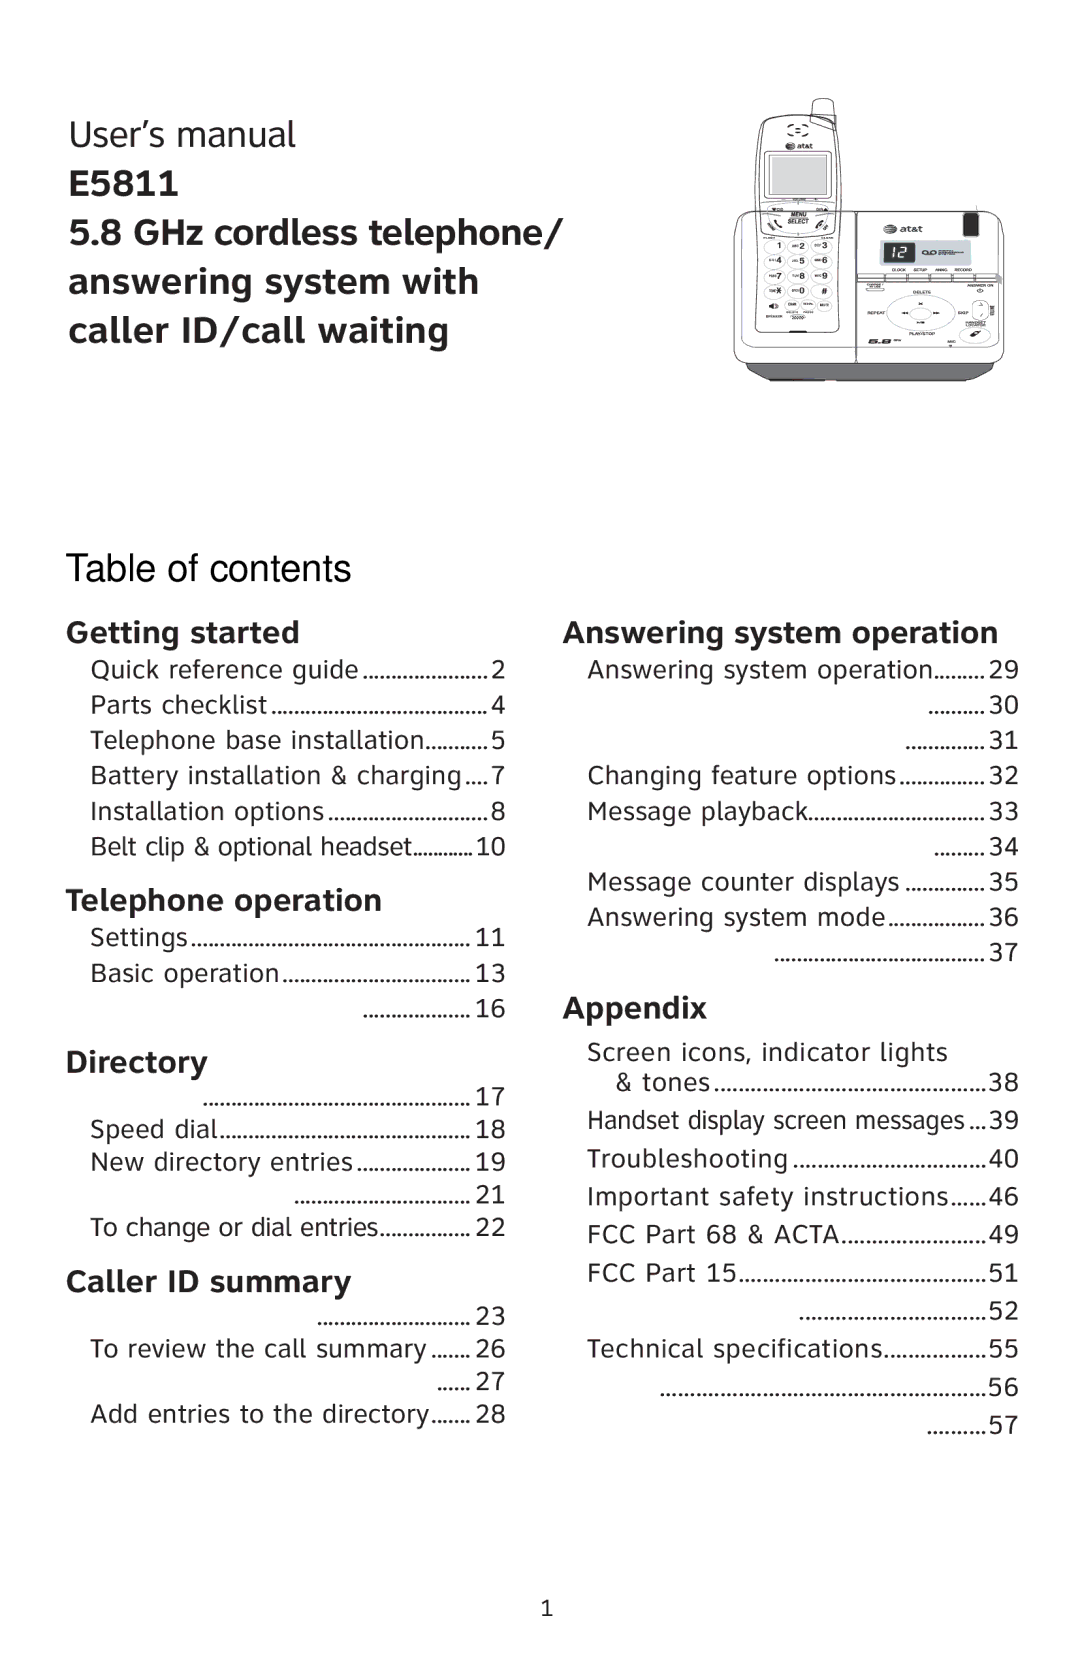 AT&T E5811 user manual Table of contents 